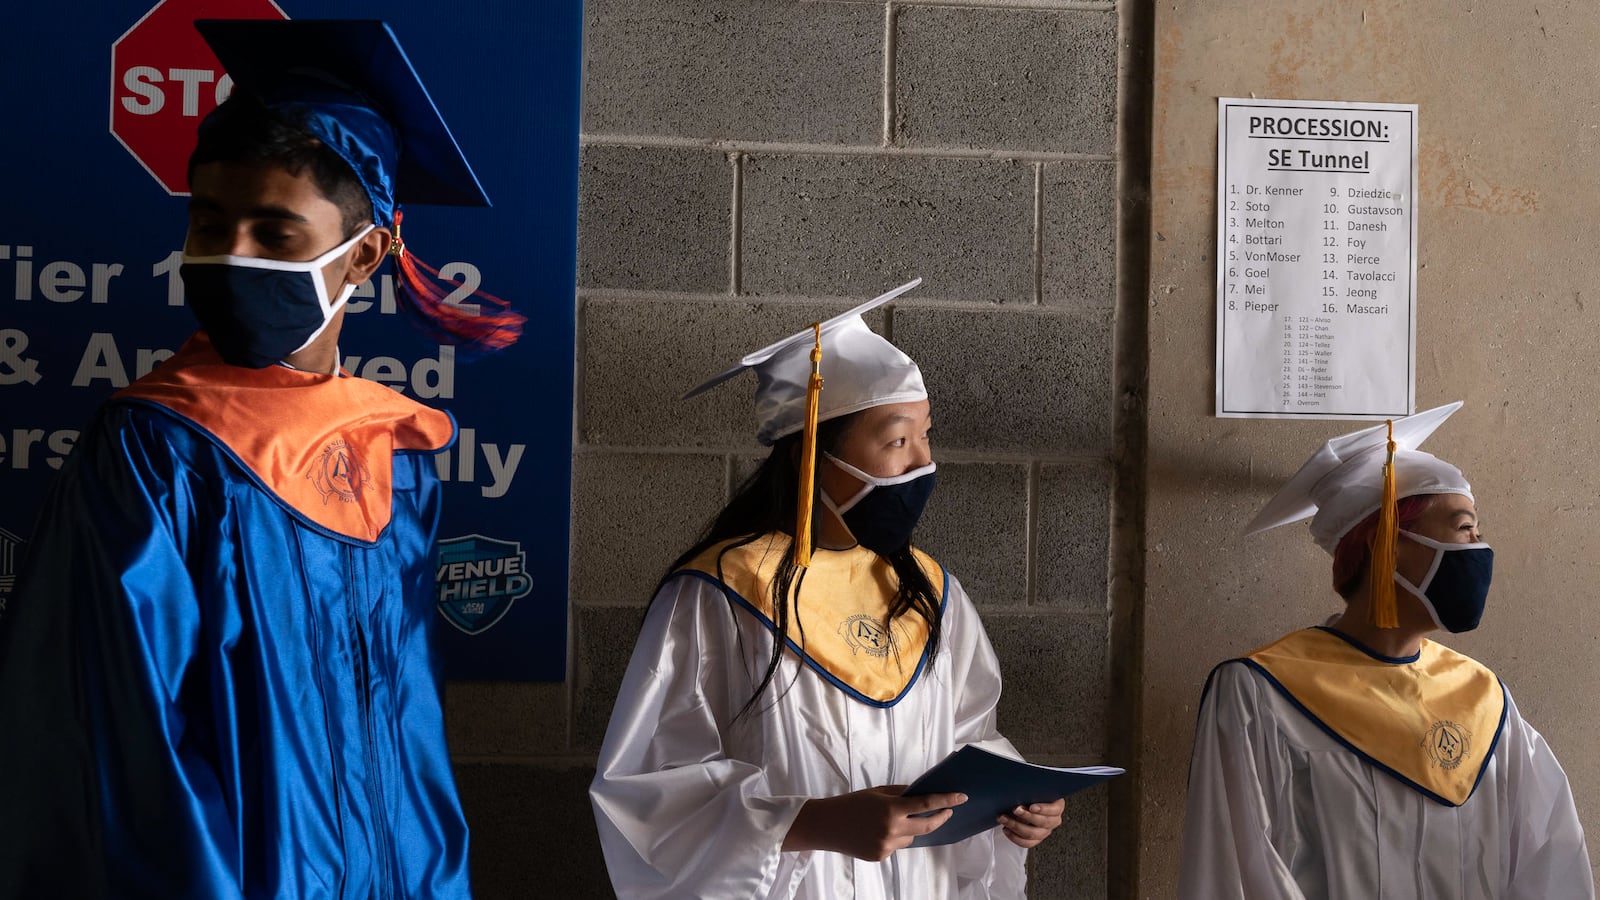 A young man in blue and orange graduation regalia stands next to two young women wearing white and gold graduation caps and gowns, each holding programs in their hands.